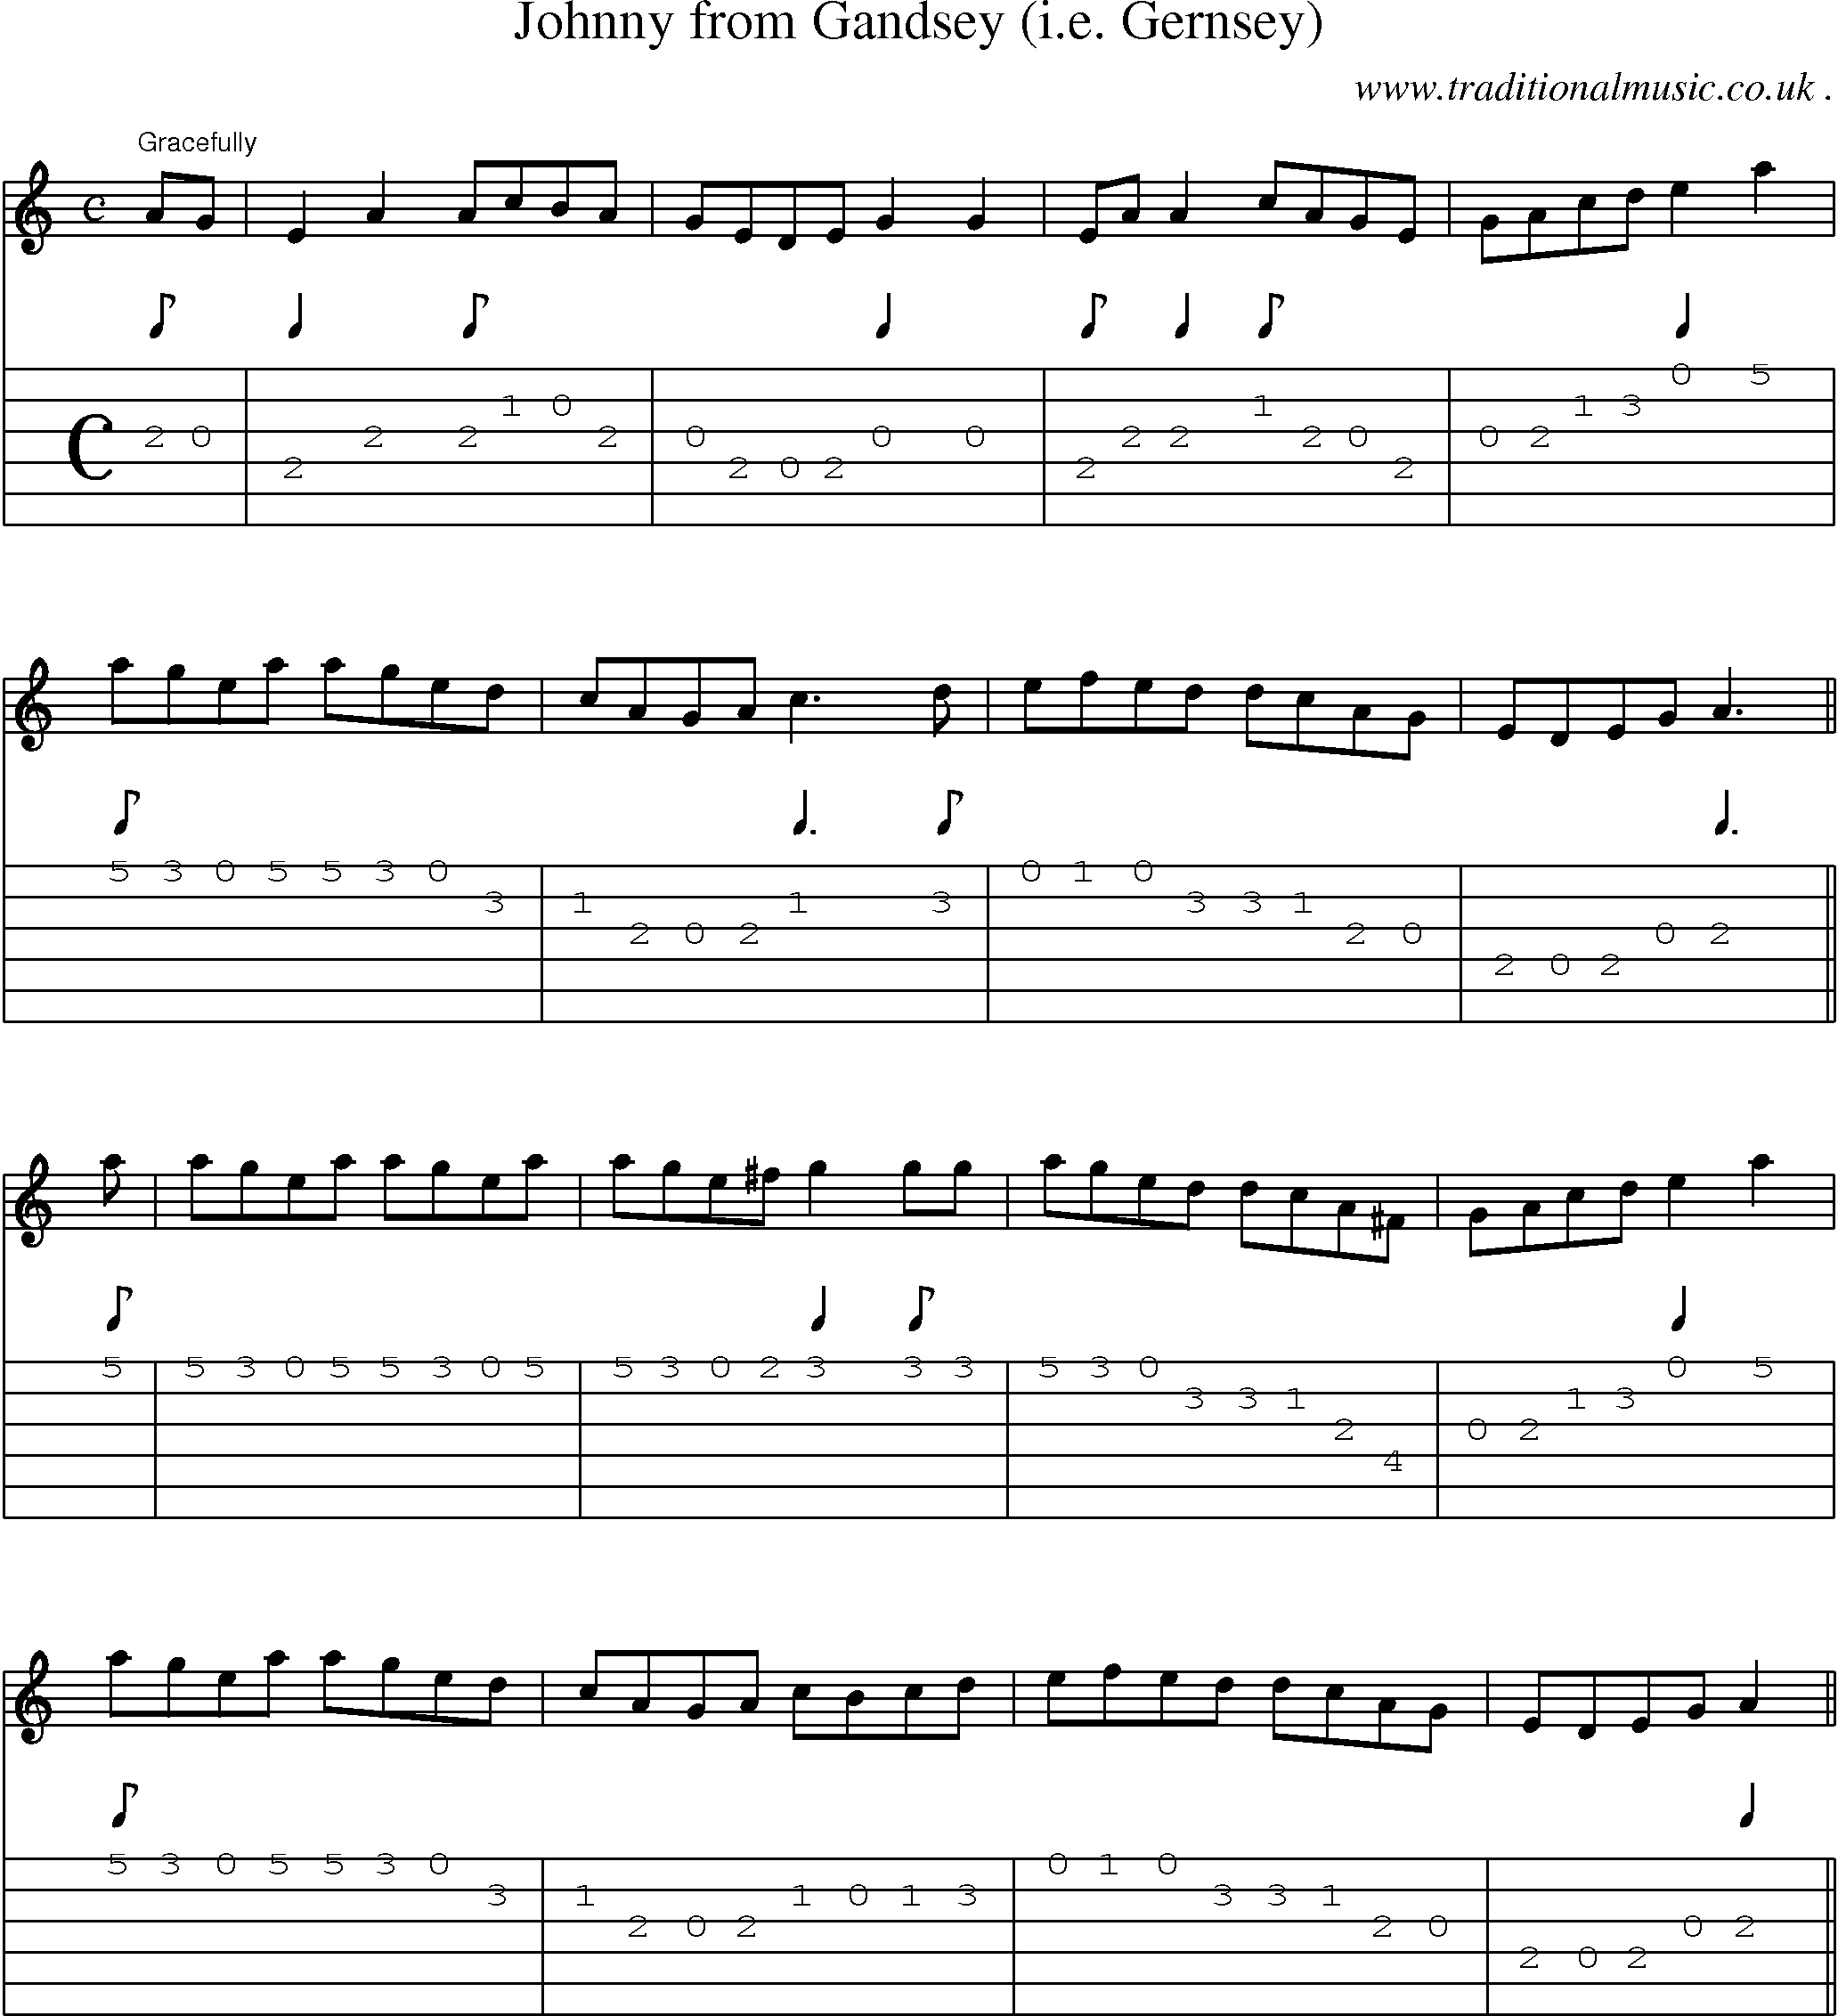 Sheet-Music and Guitar Tabs for Johnny From Gandsey (ie Gernsey)